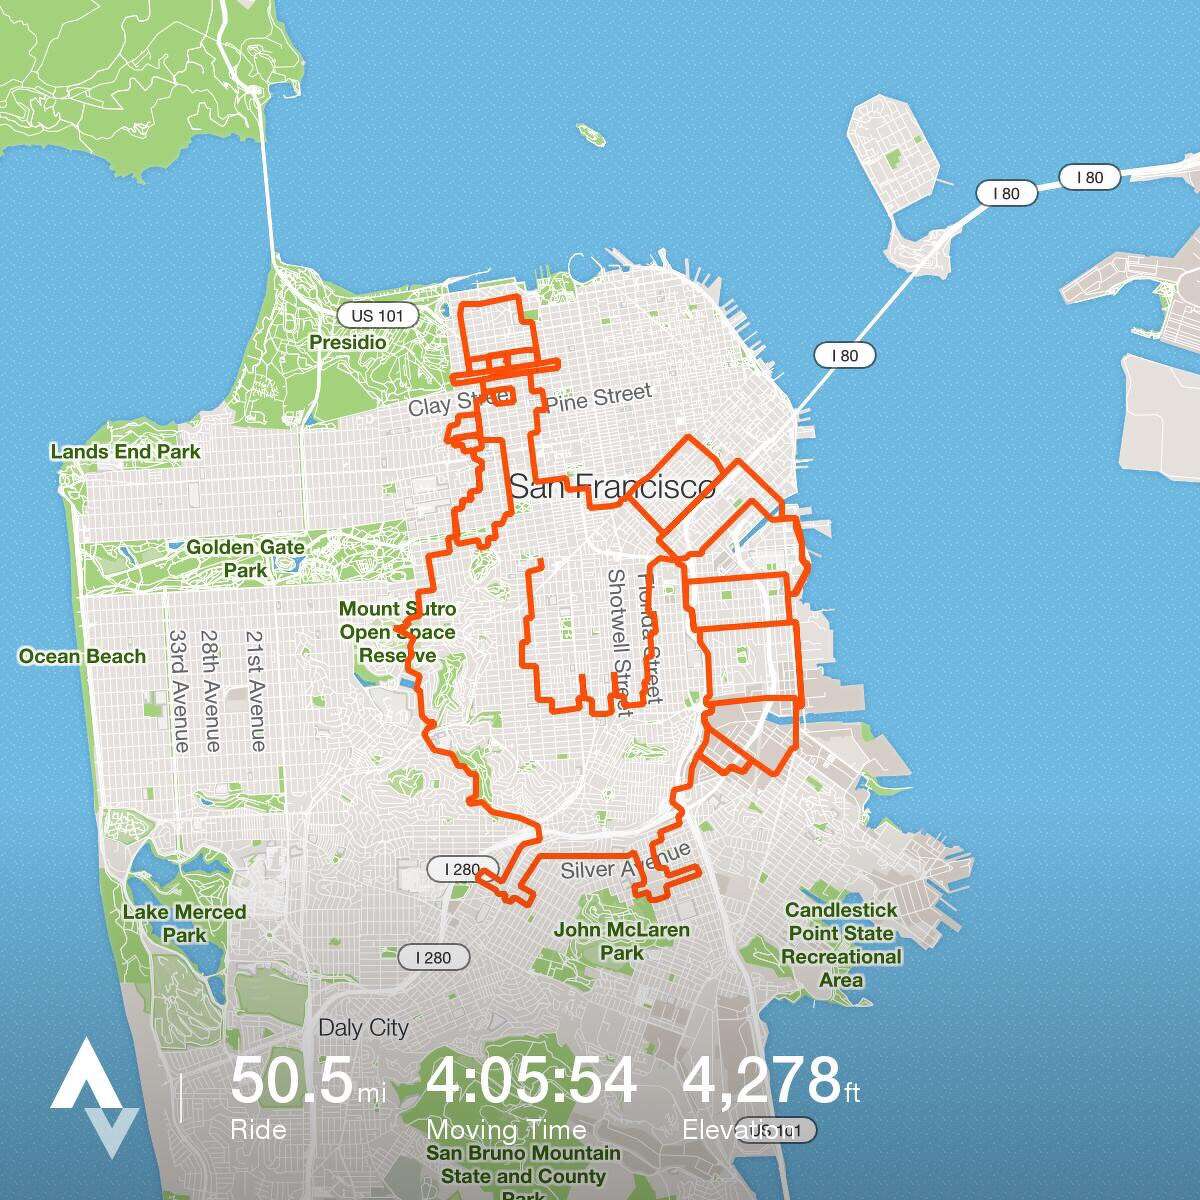 Bret Lobree tracked his route with GPS as he and his friends completed the Turkey Ride in San Francisco on Nov. 21, 2016. 